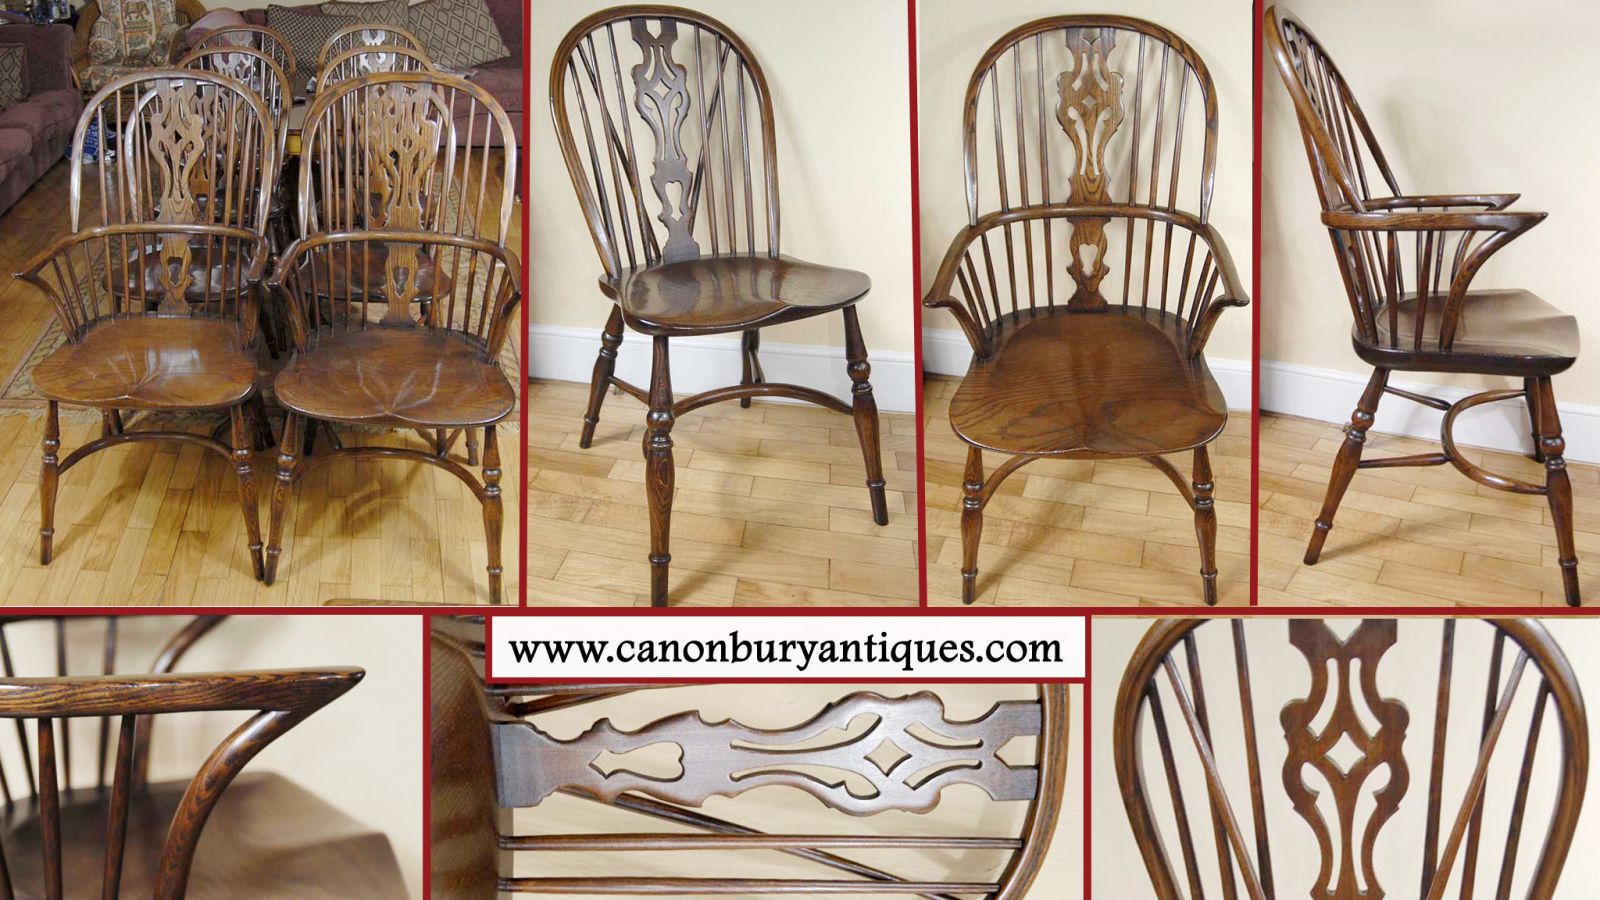 The classic farmhouse kitchen chair - a set of Windsors